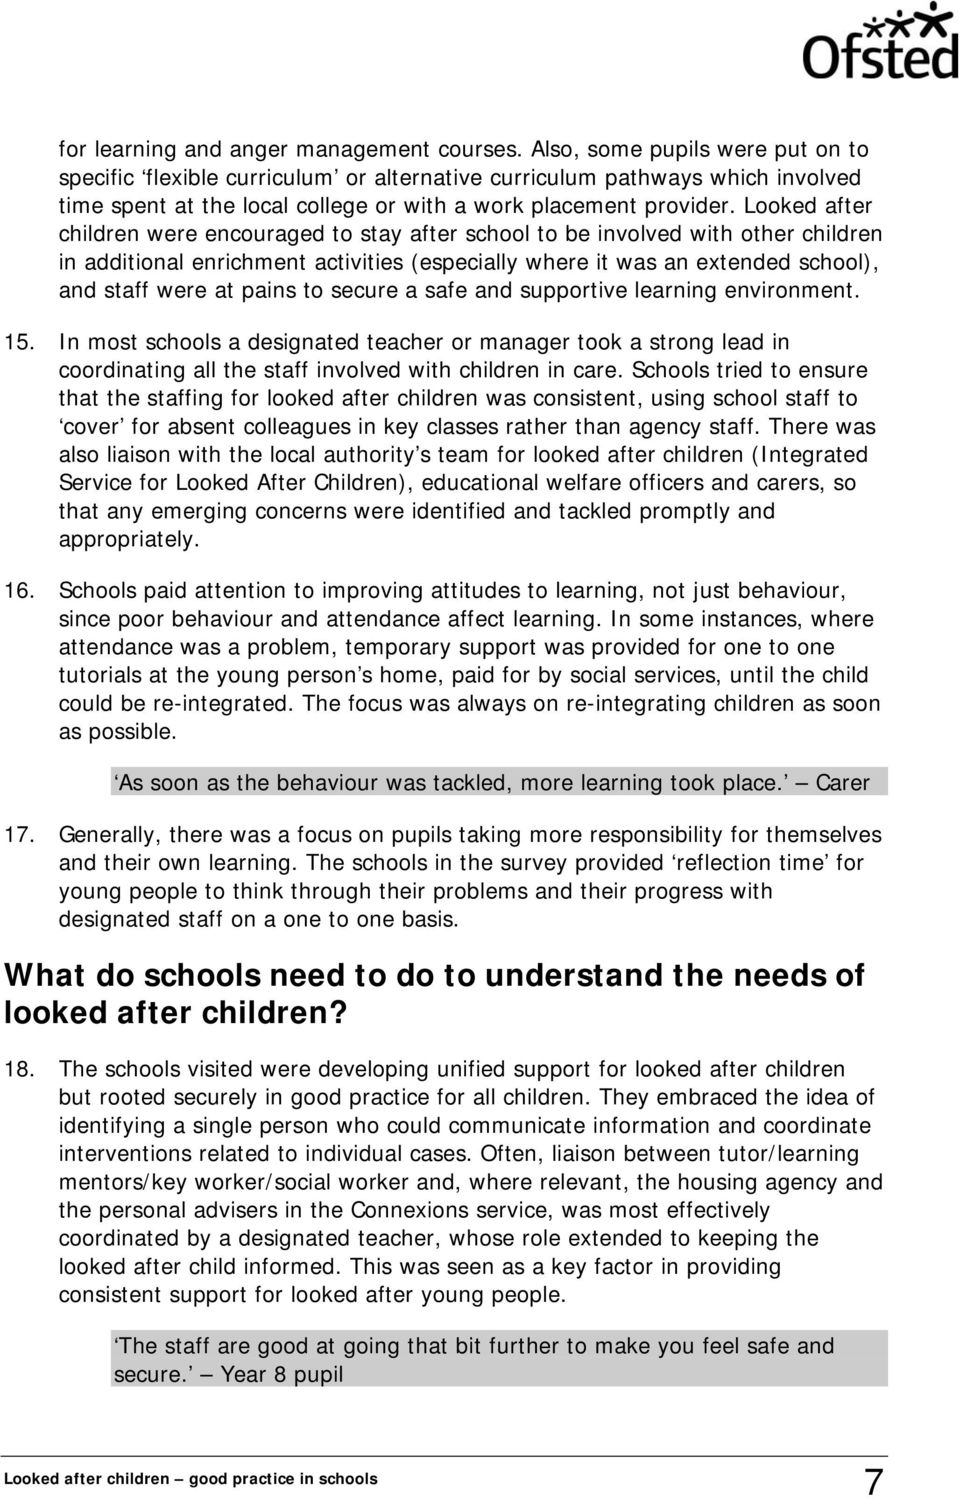 Looked after children were encouraged to stay after school to be involved with other children in additional enrichment activities (especially where it was an extended school), and staff were at pains